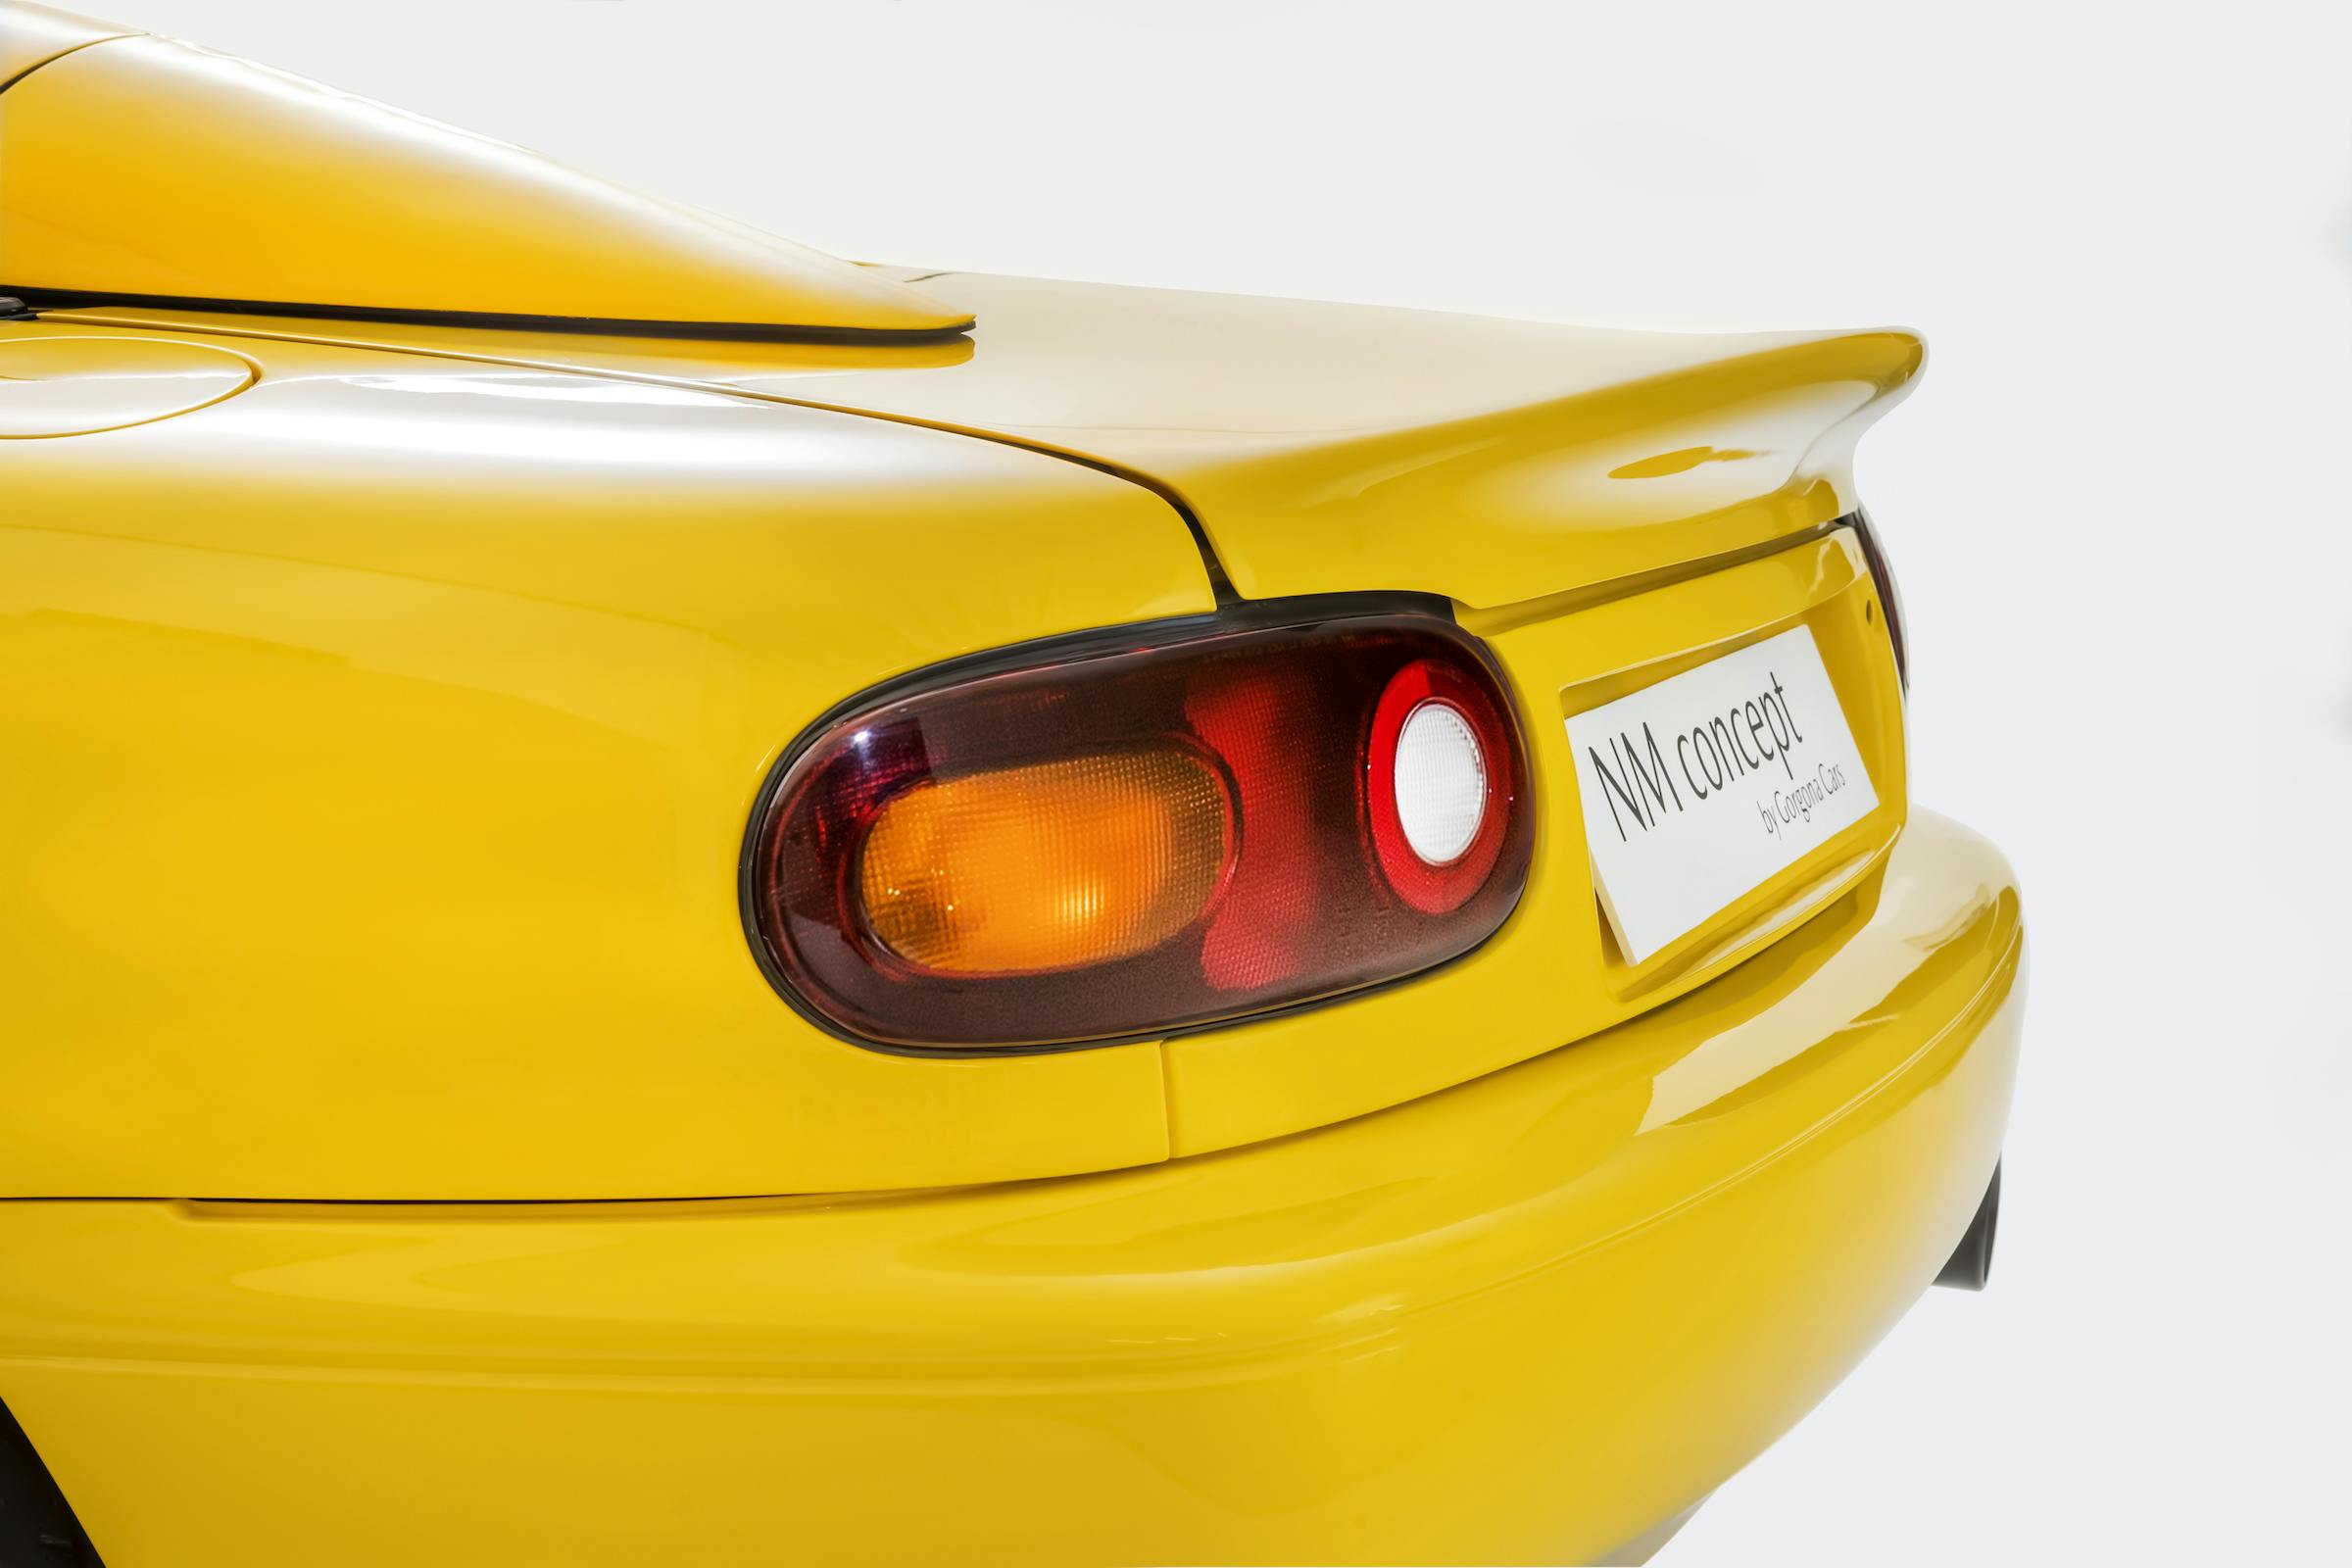 NM concept taillight